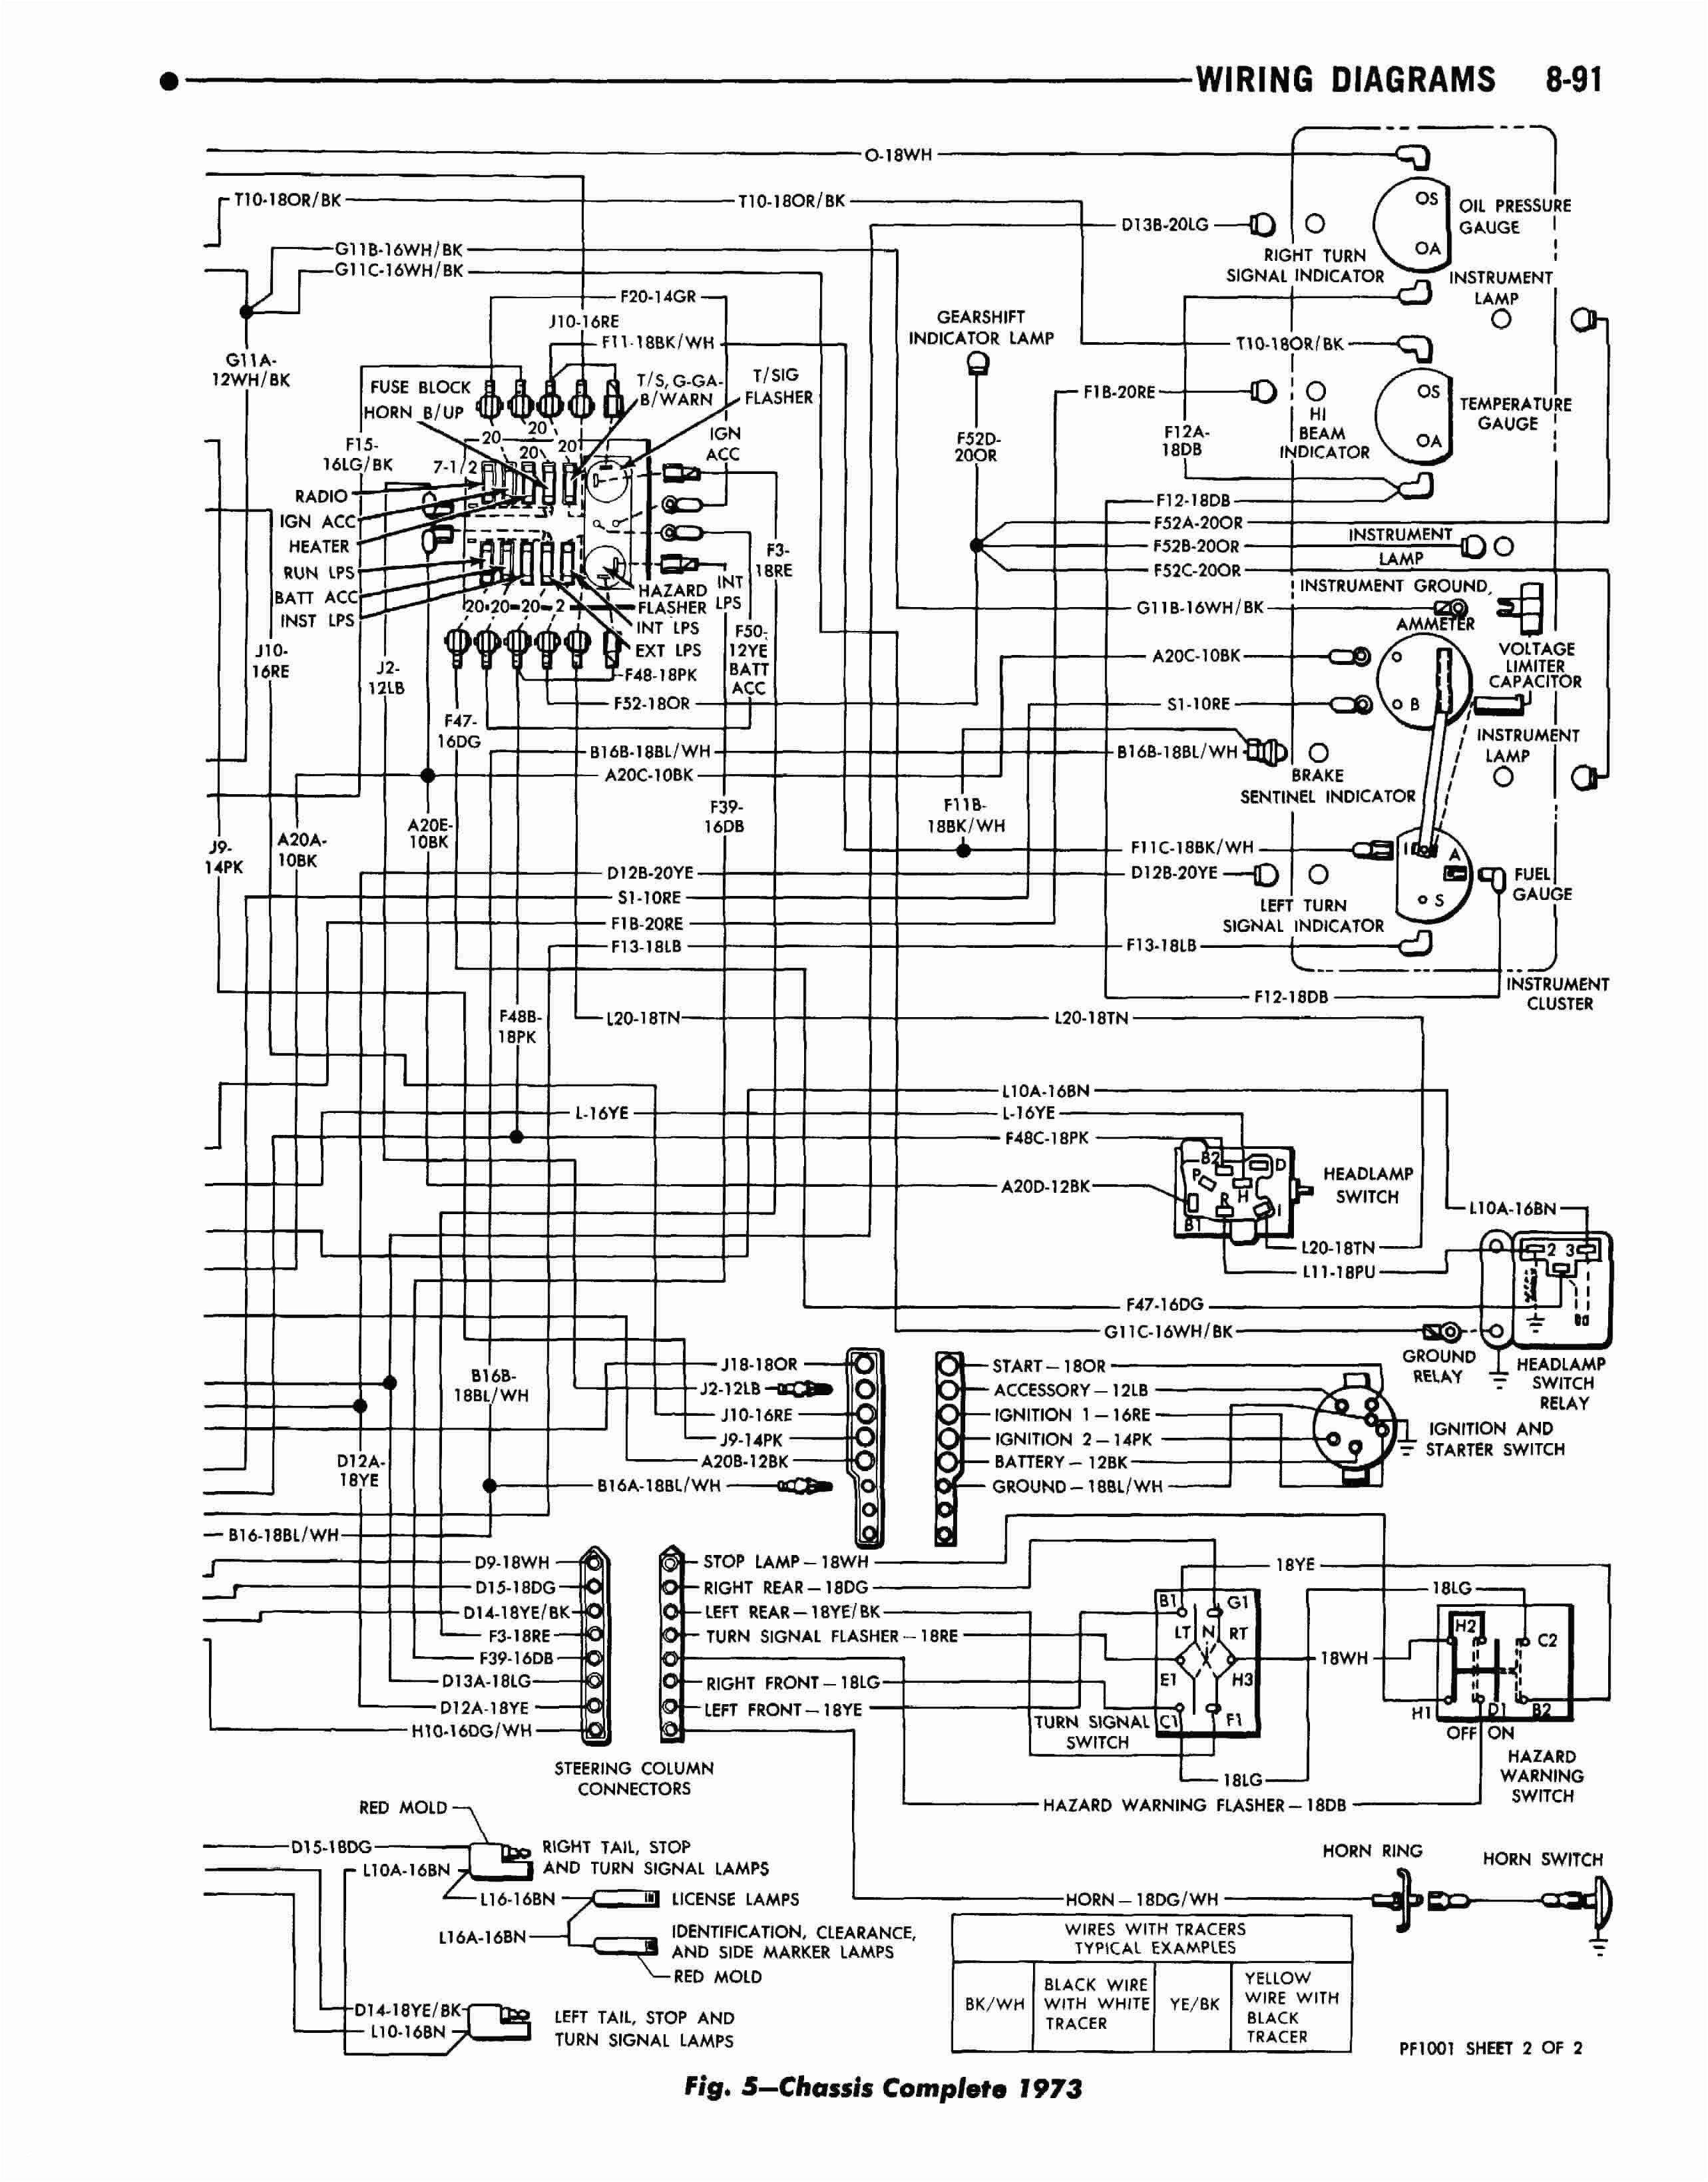 1996 peterbilt 379 wiring diagram unique 2009 fleetwood trusted diagrams e280a2 of ford f53 chassis jpg